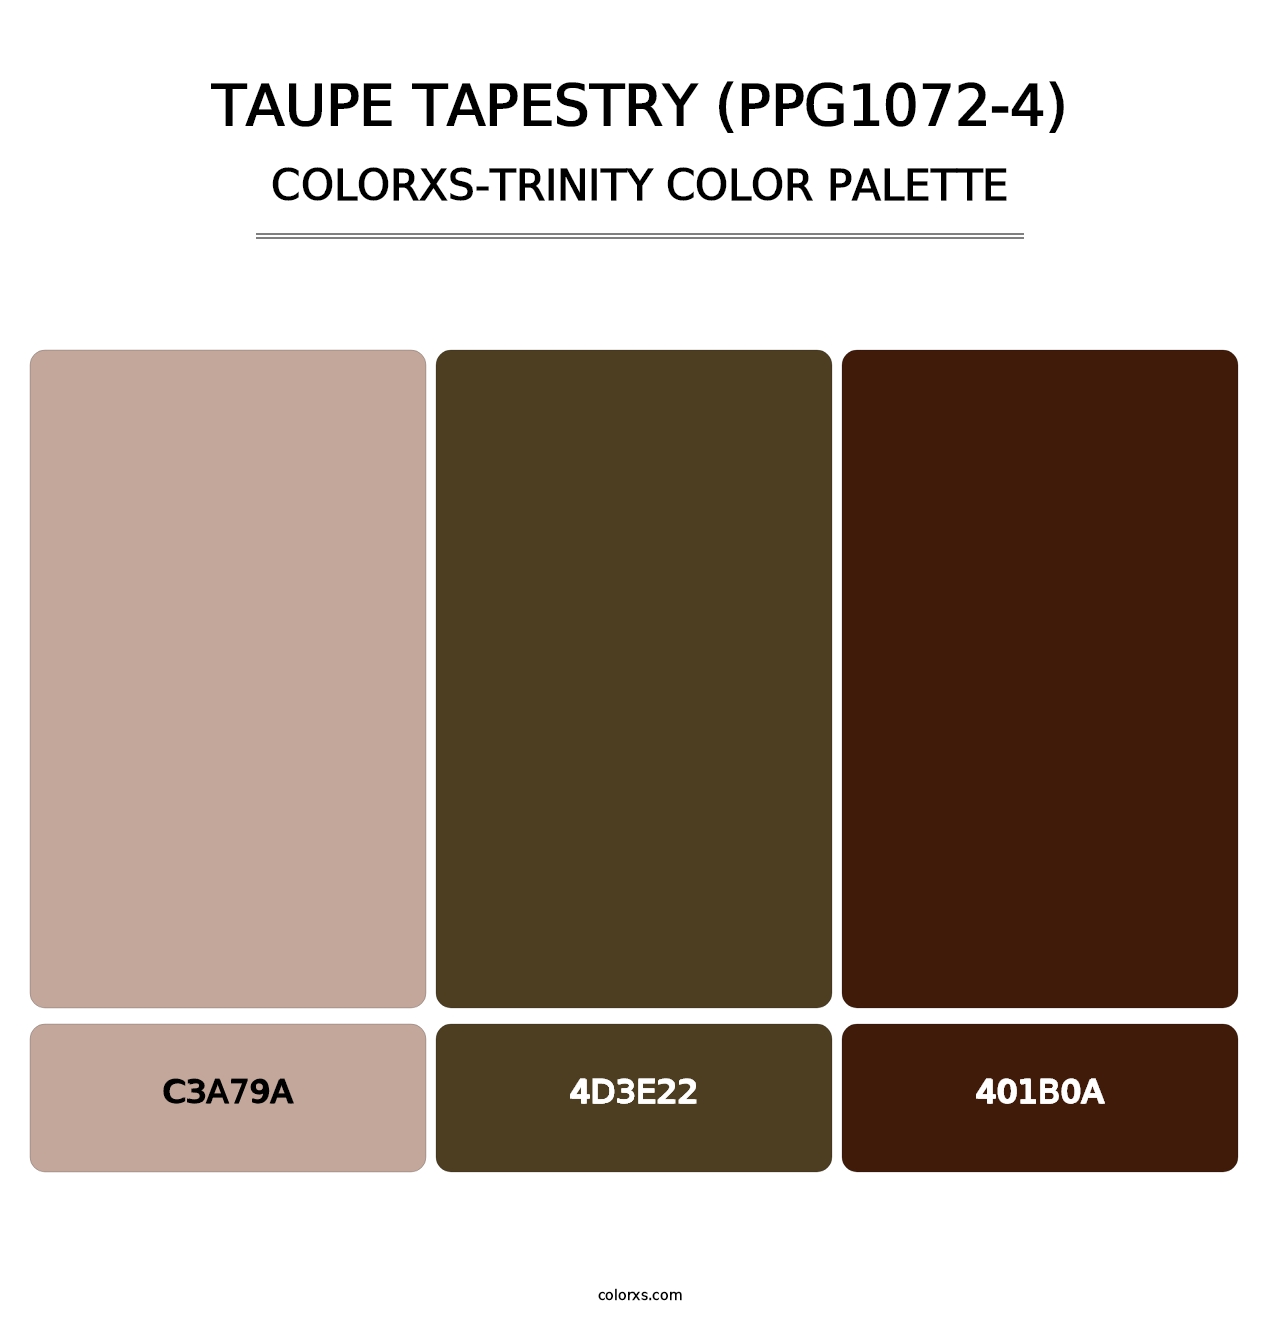 Taupe Tapestry (PPG1072-4) - Colorxs Trinity Palette